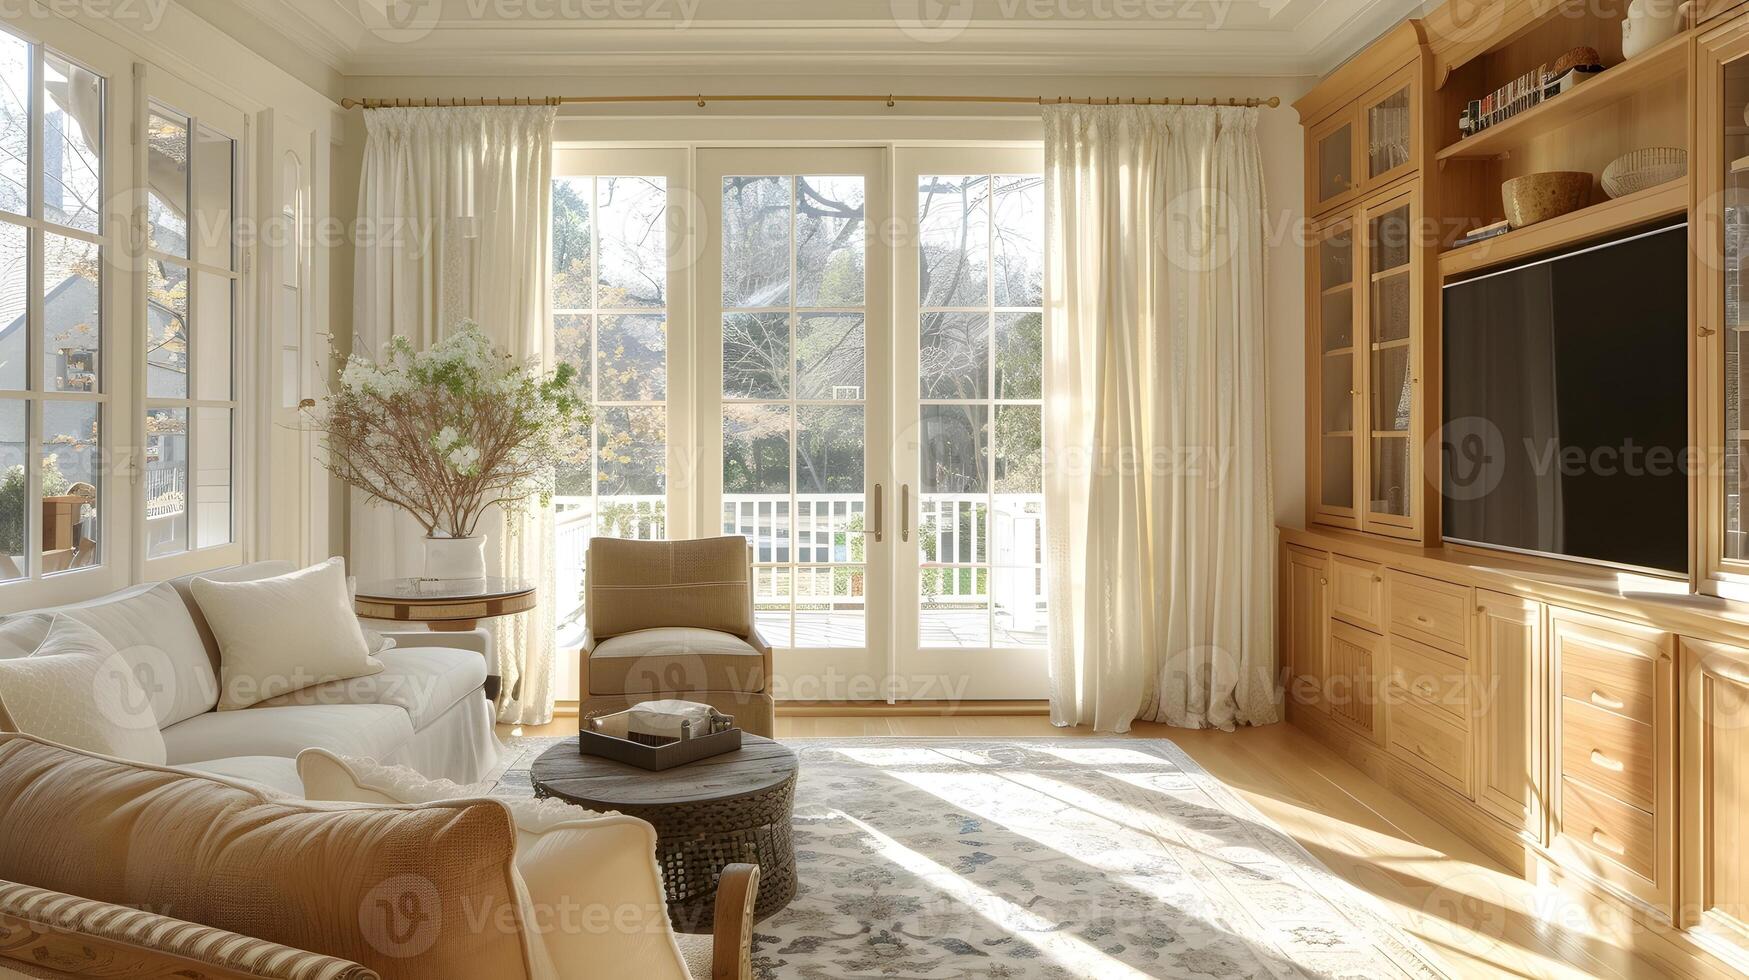 Handcrafted Maple Cabinetry and Sun-Kissed Lace Curtains - Cozy Family Room with Elegant Living Space photo